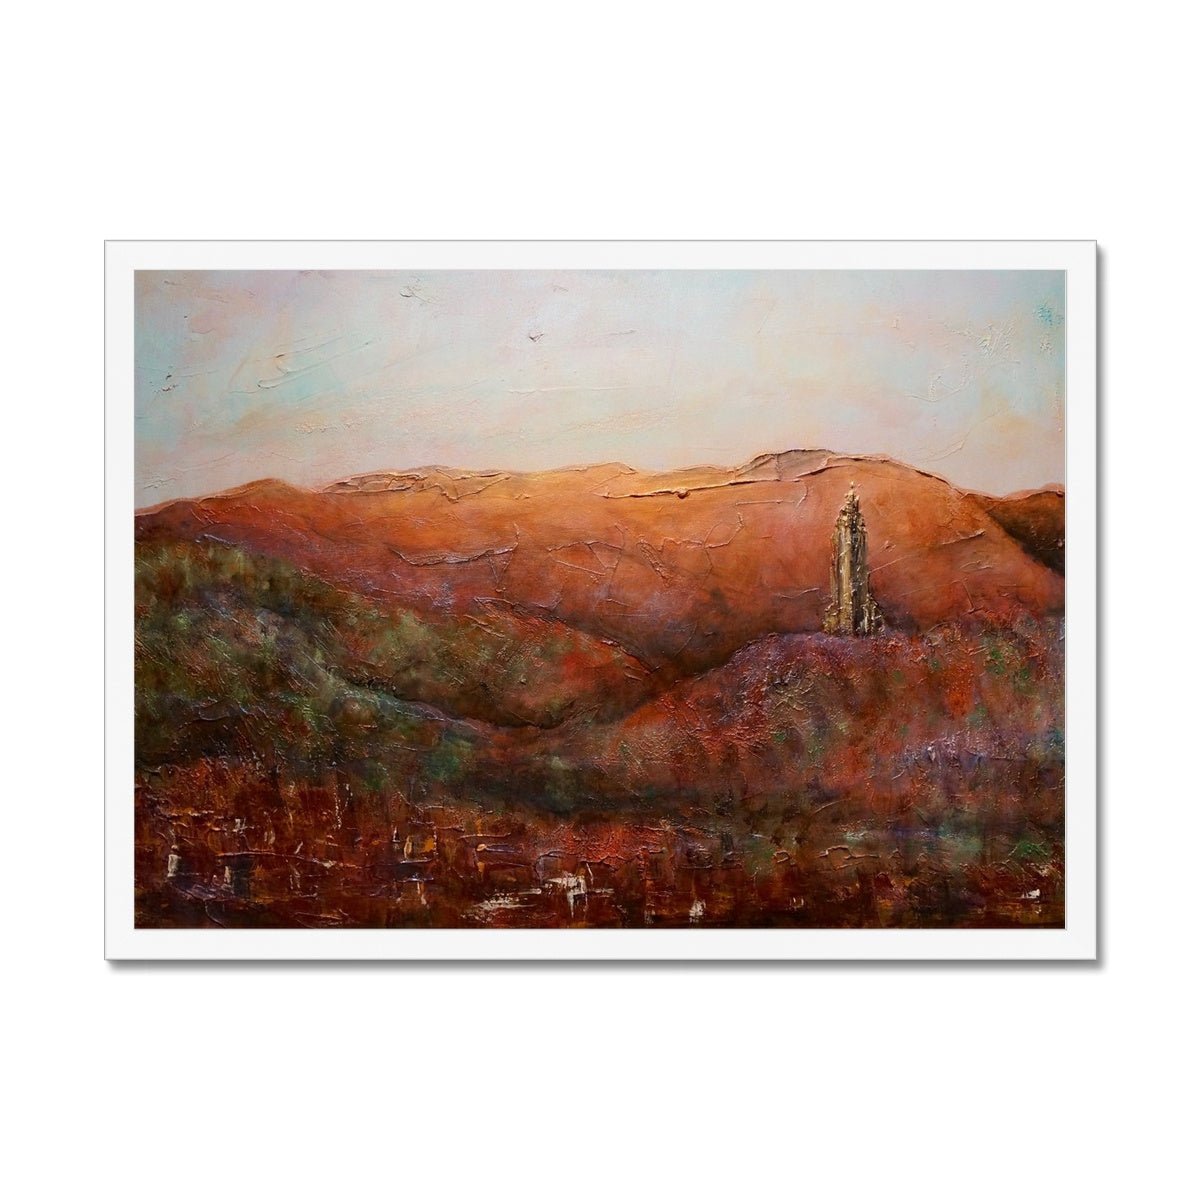 The Wallace Monument Painting | Framed Prints From Scotland-Framed Prints-Historic & Iconic Scotland Art Gallery-A2 Landscape-White Frame-Paintings, Prints, Homeware, Art Gifts From Scotland By Scottish Artist Kevin Hunter